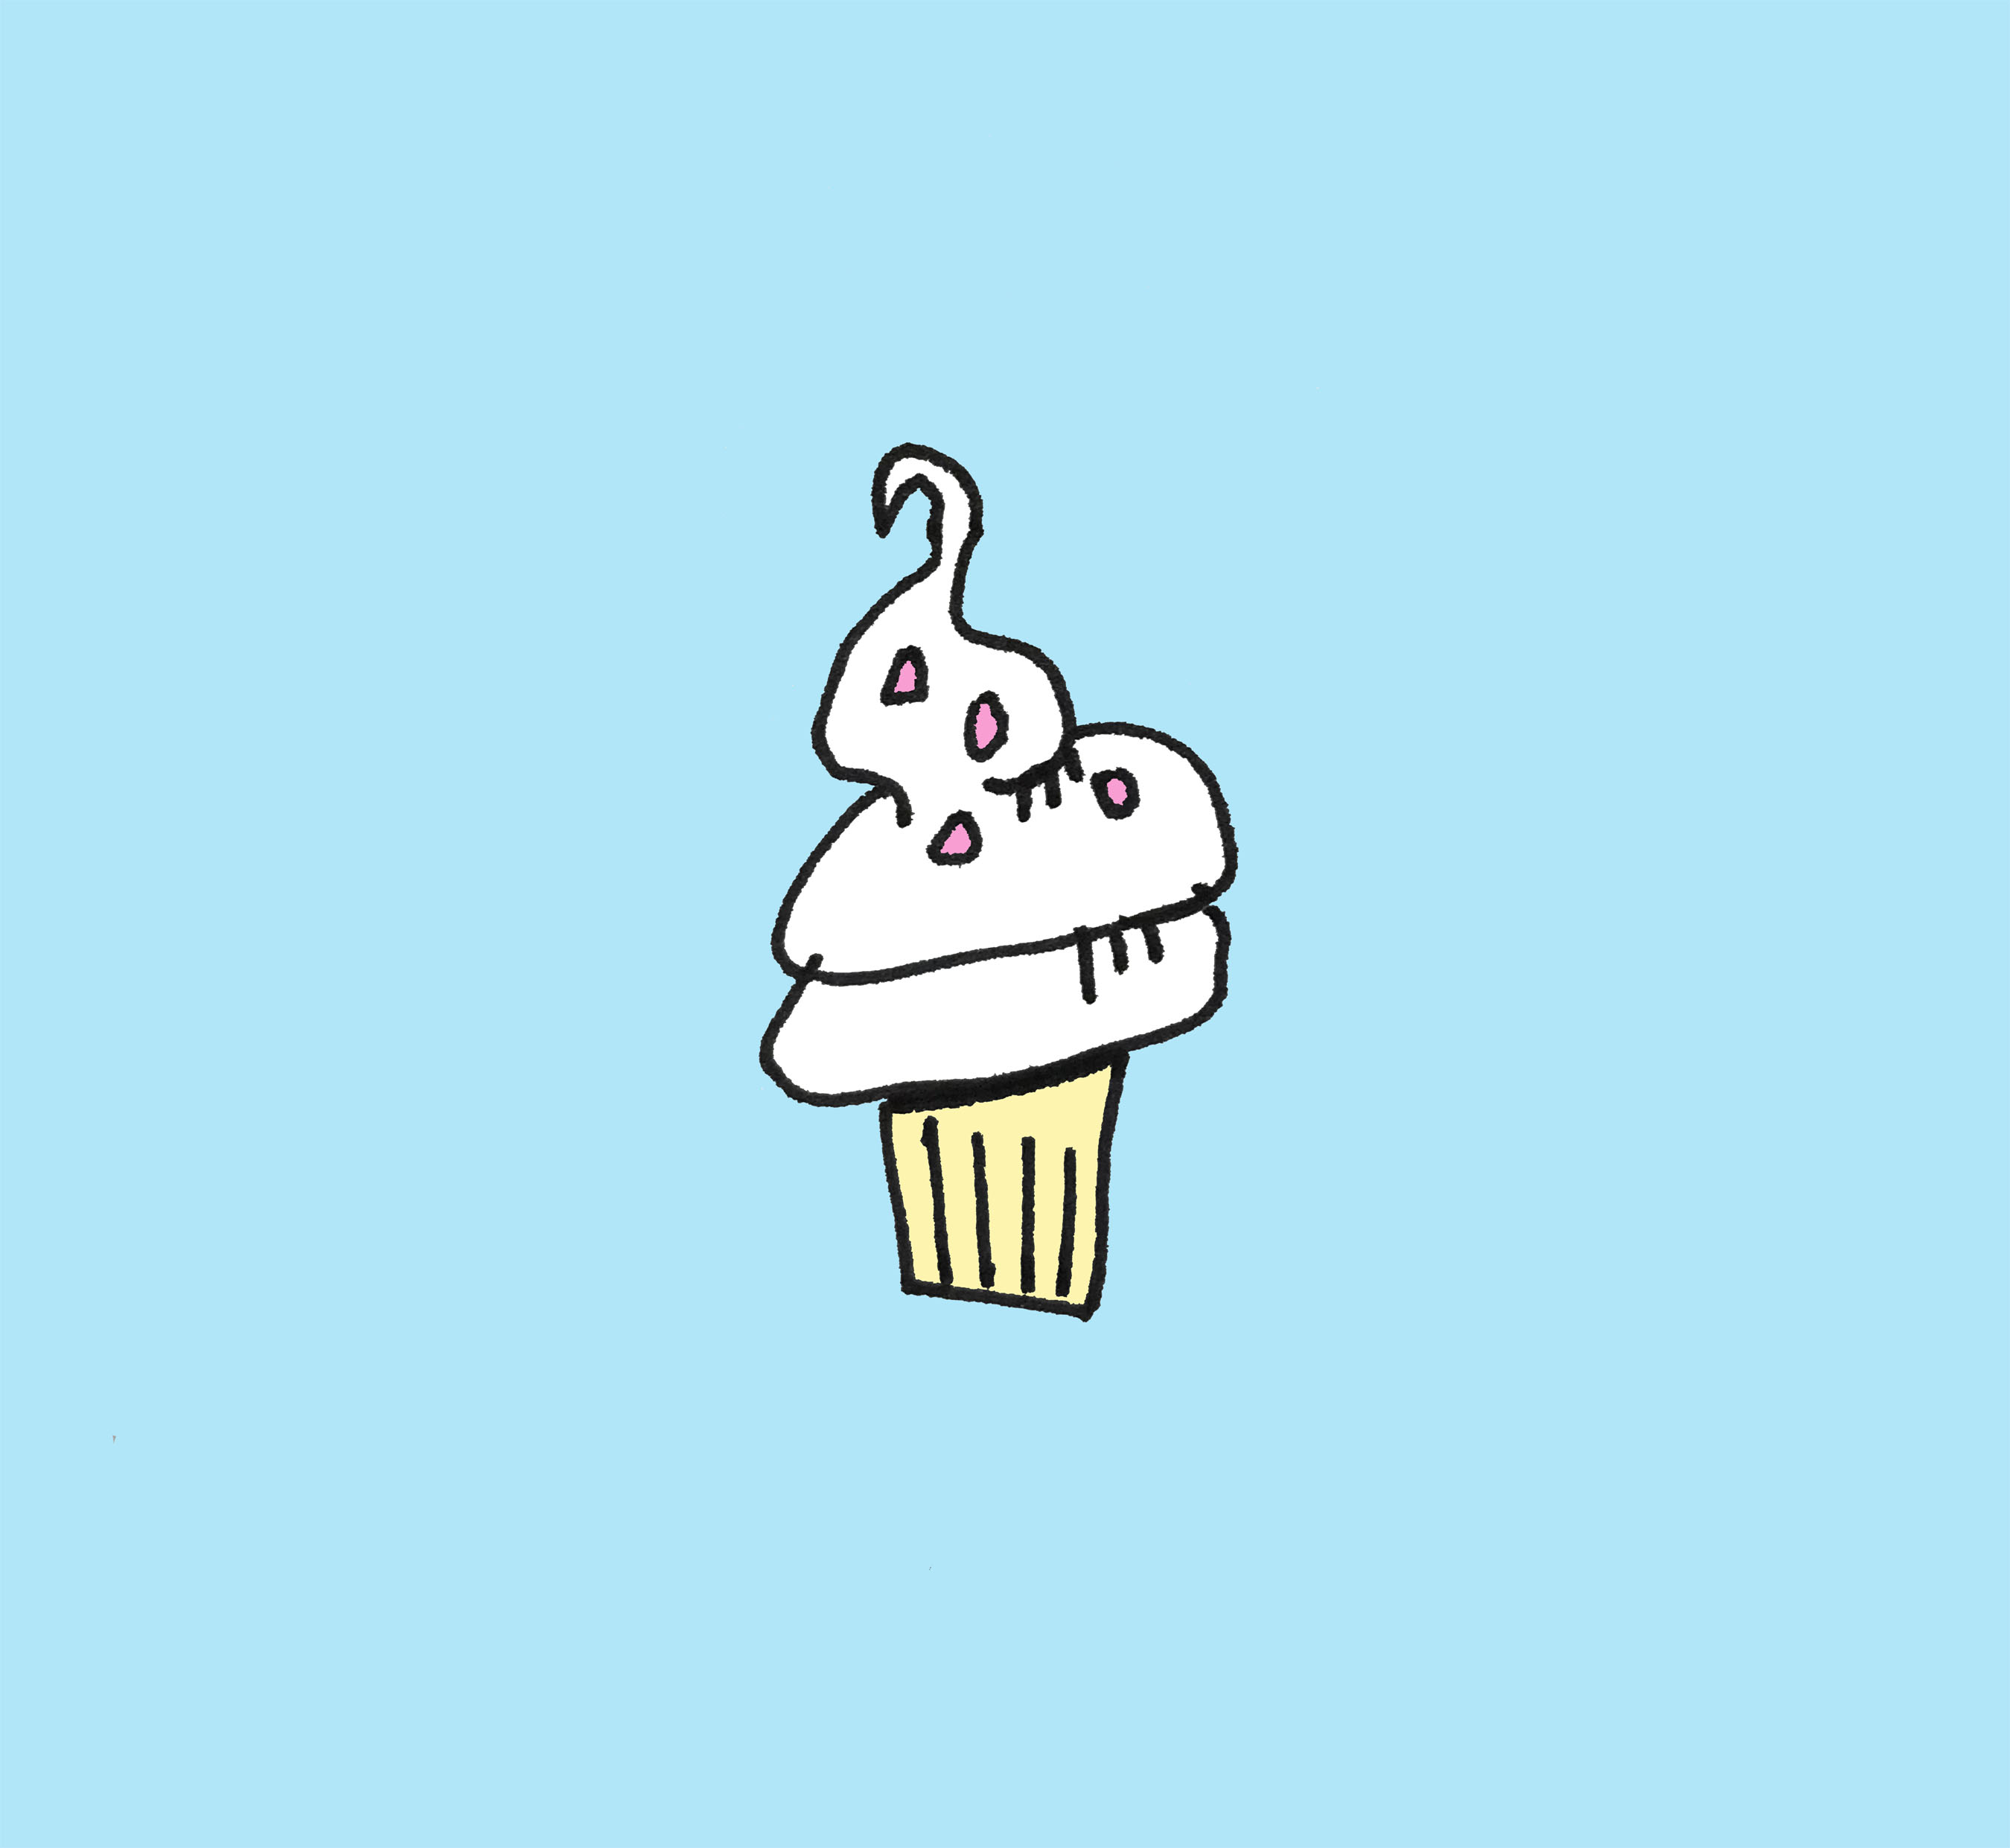 art every day number 302 / illustration / cupcake